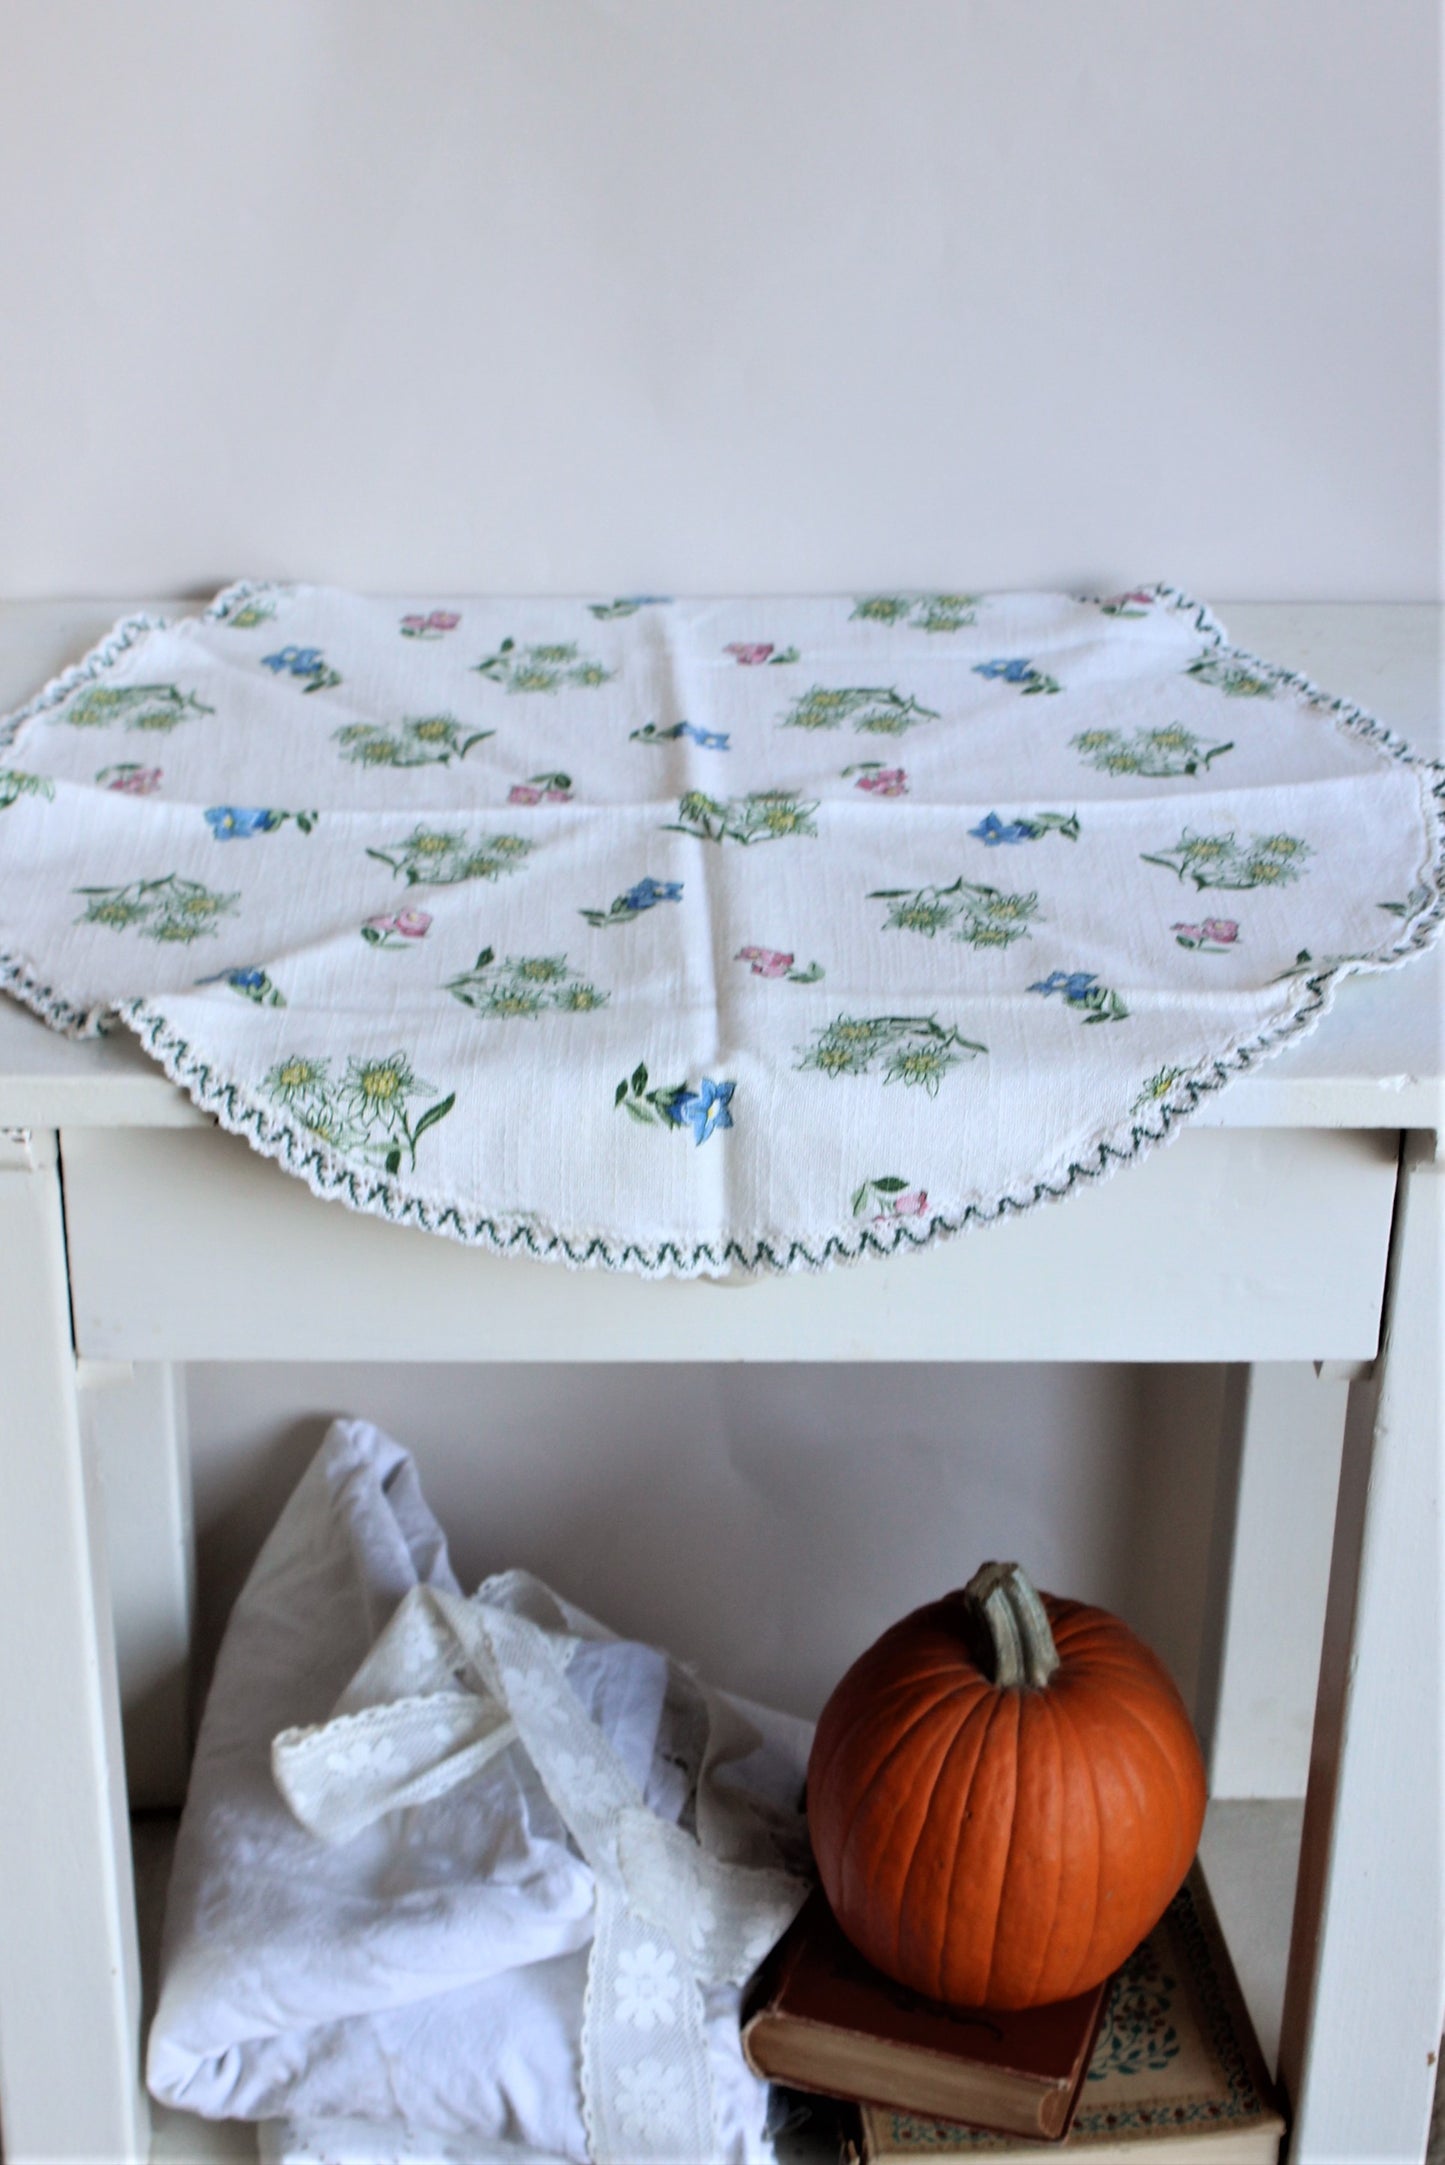 Vintage 1980s Small Round Floral Print Tablecloth